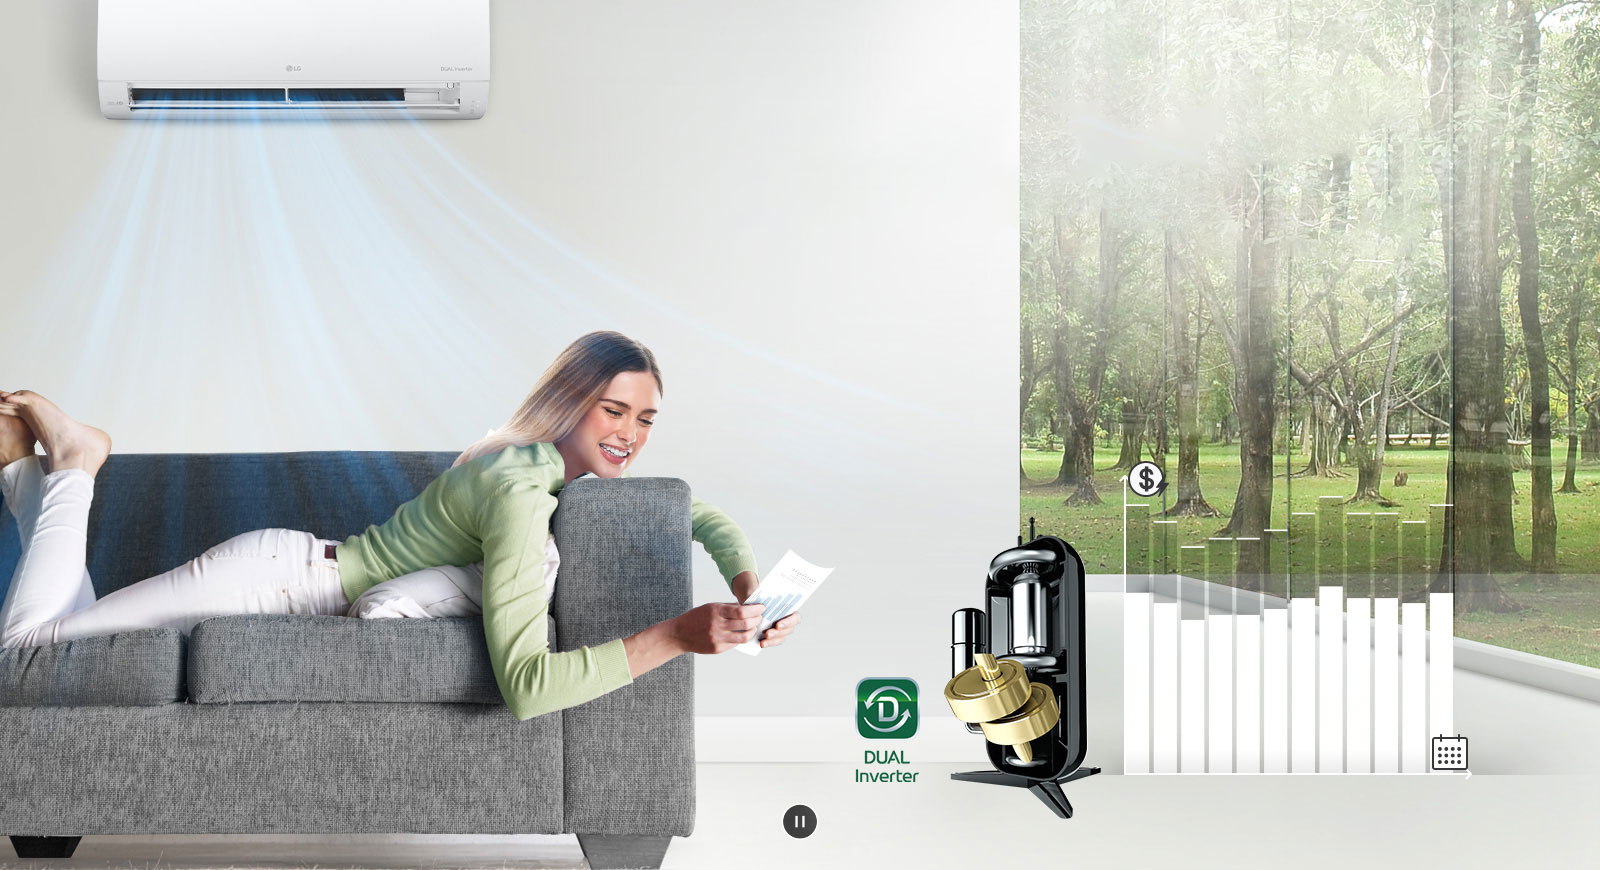 A woman lounges on a sofa smiling as the air conditioner blows air above her. To the right of the woman is the Dual Inverter logo and an image of the Dual Dual Inverter. Further to the right is a bar graph. The bars go up indicating more money spent and then go down to show that the dual inverter saves customers money.